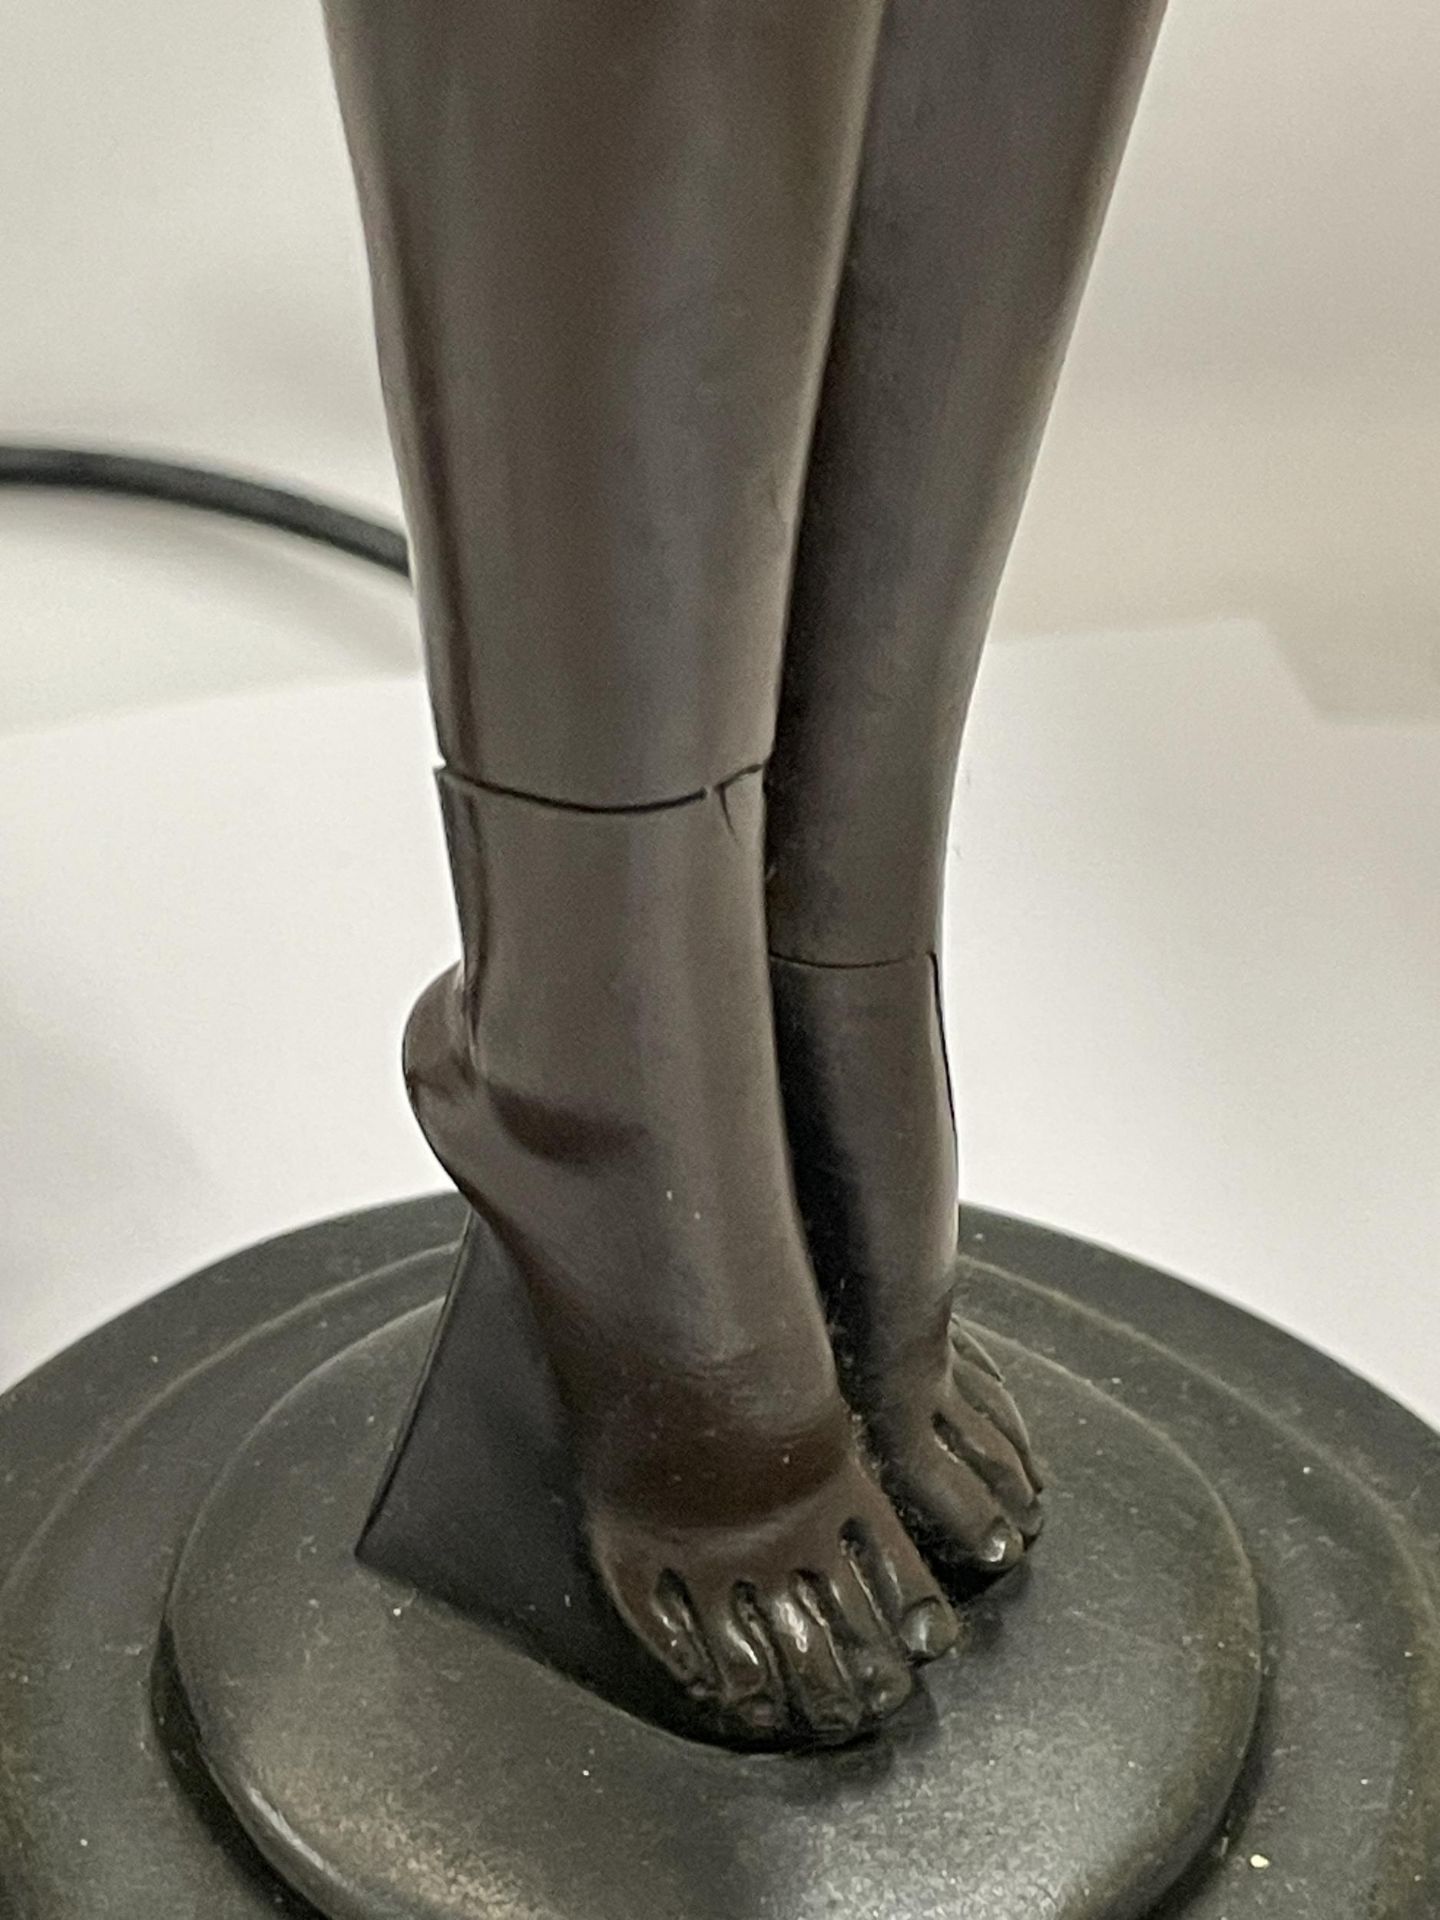 AN ART DECO BRONZE ART LAMP WITH SHADE - "NORA STANDING" - LEG A/F - Image 3 of 3